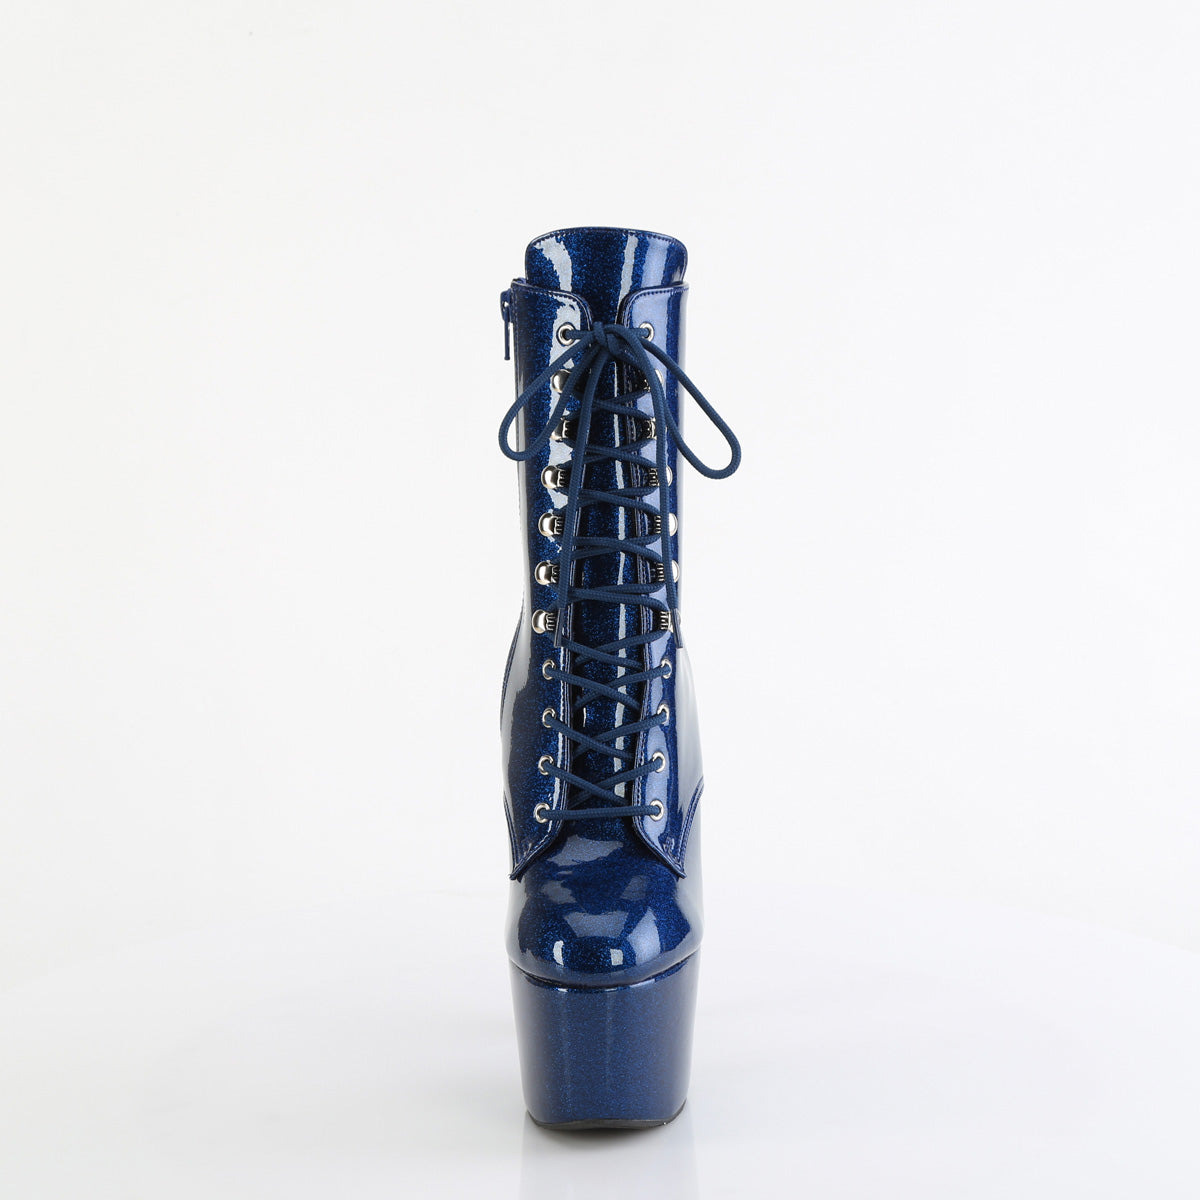 ADORE-1020GP Pleaser Navy Blue Glitter Patent Ankle Boots